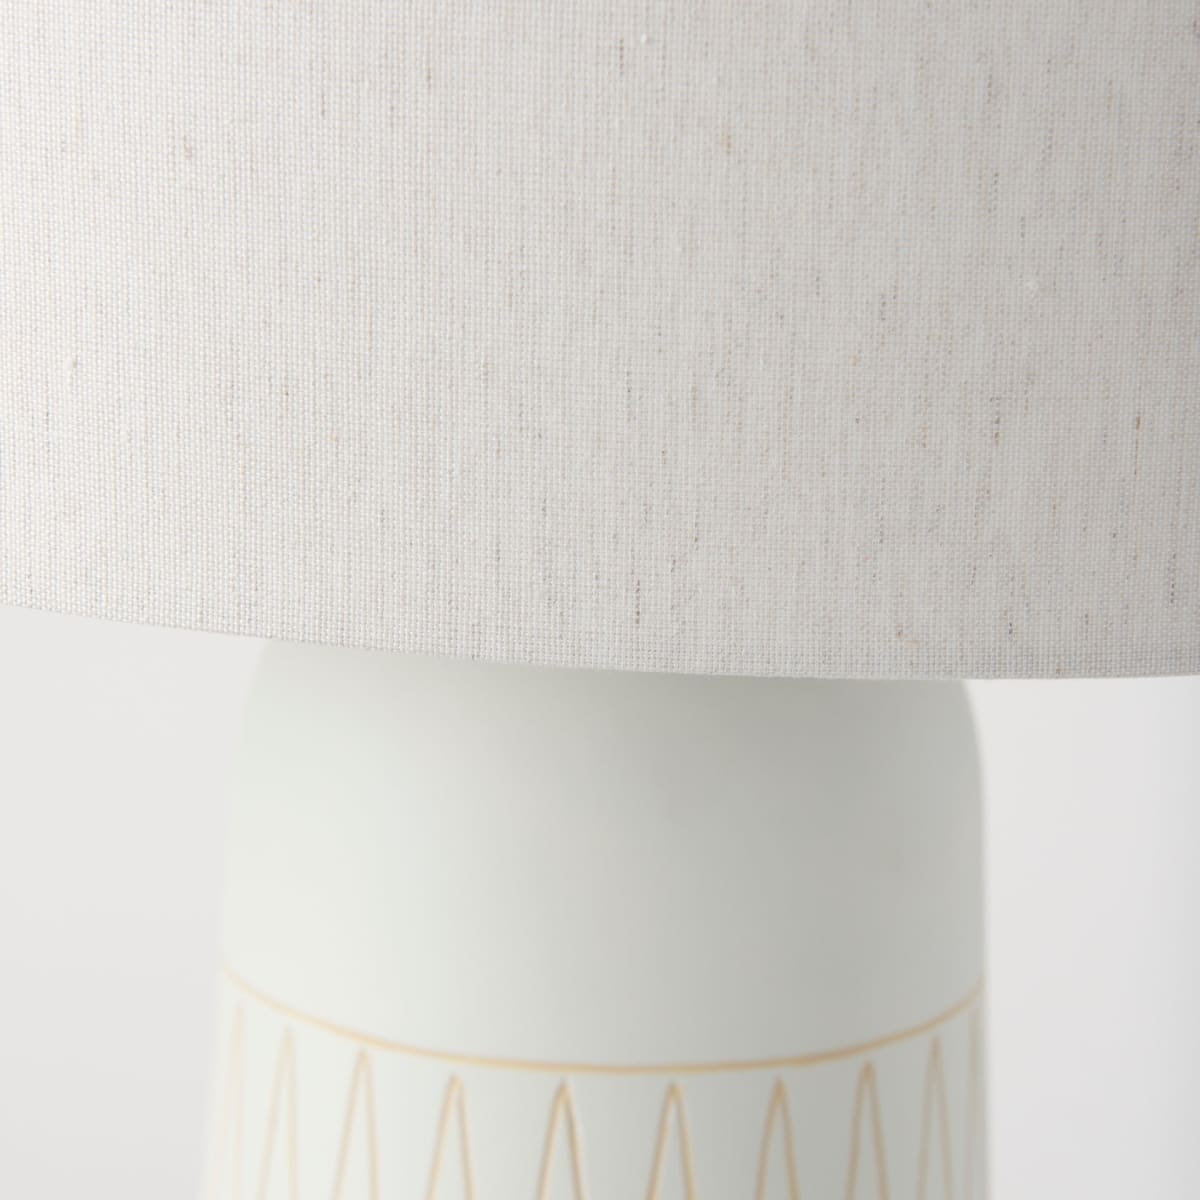 Javier Table Lamp Light Base | Cream Shade - table-lamps